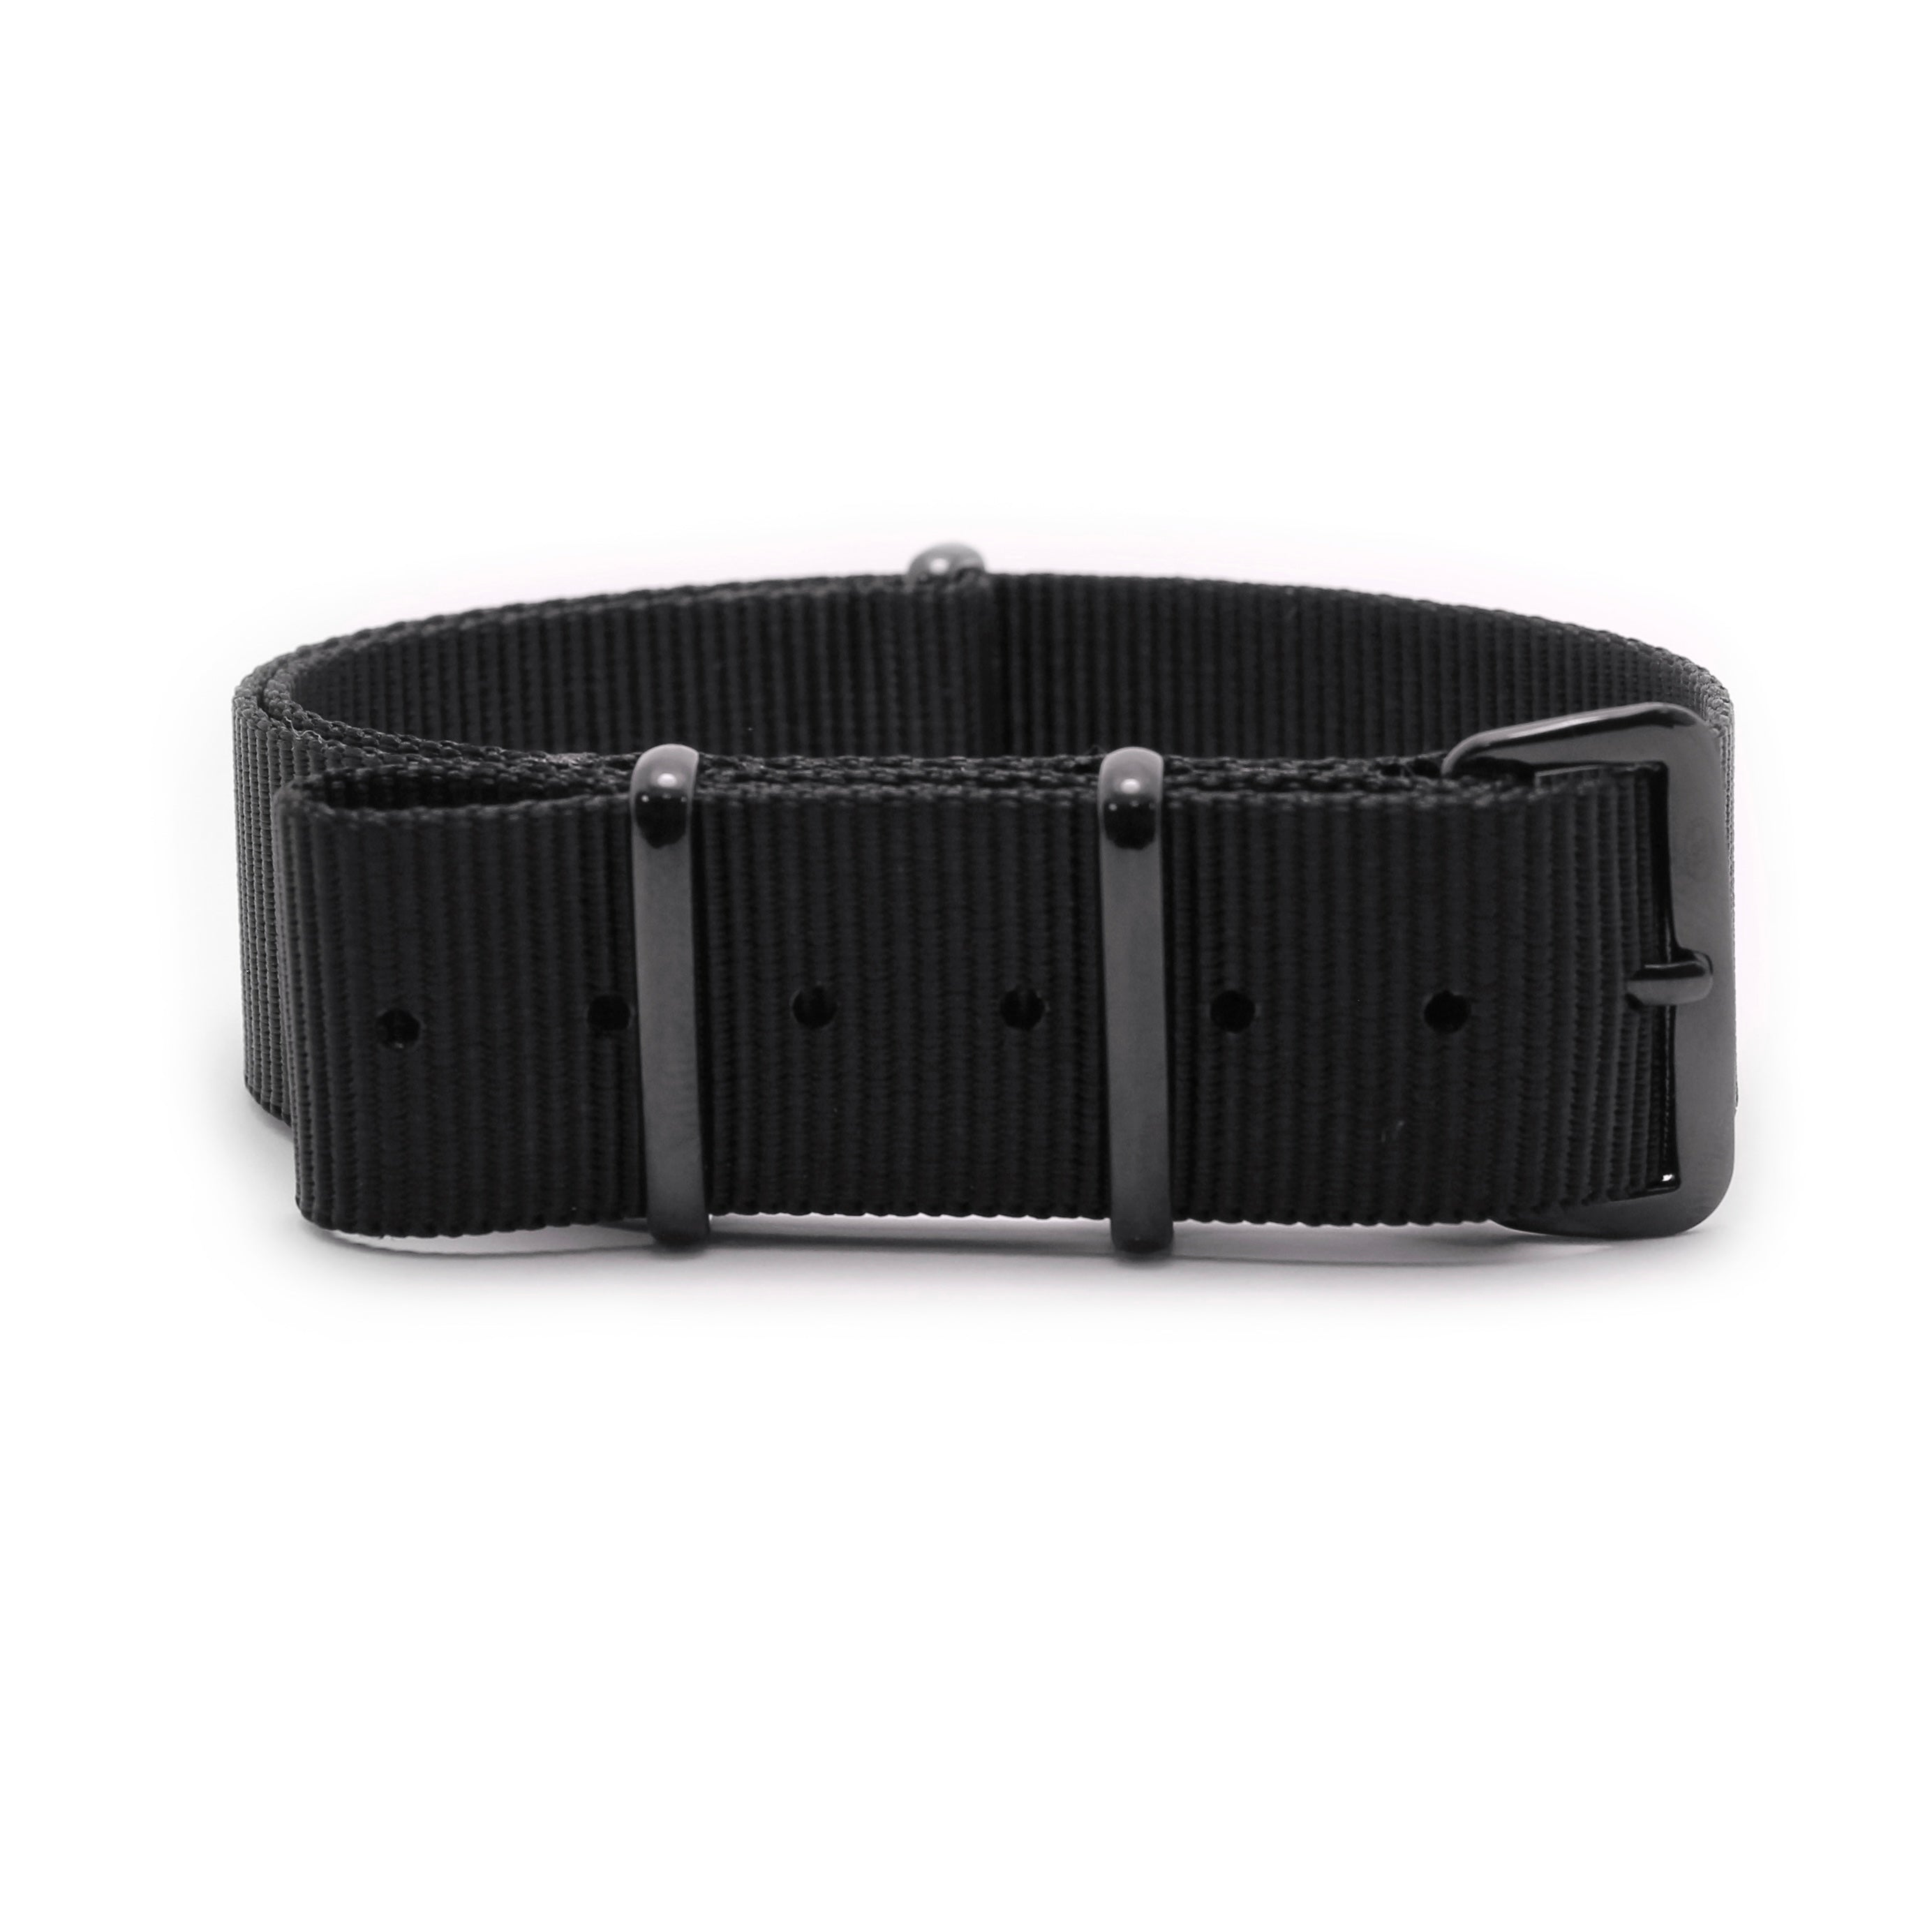 CABOT MILITARY WATCH STRAP - BLACK WITH GLOSS BLACK BUCKLE